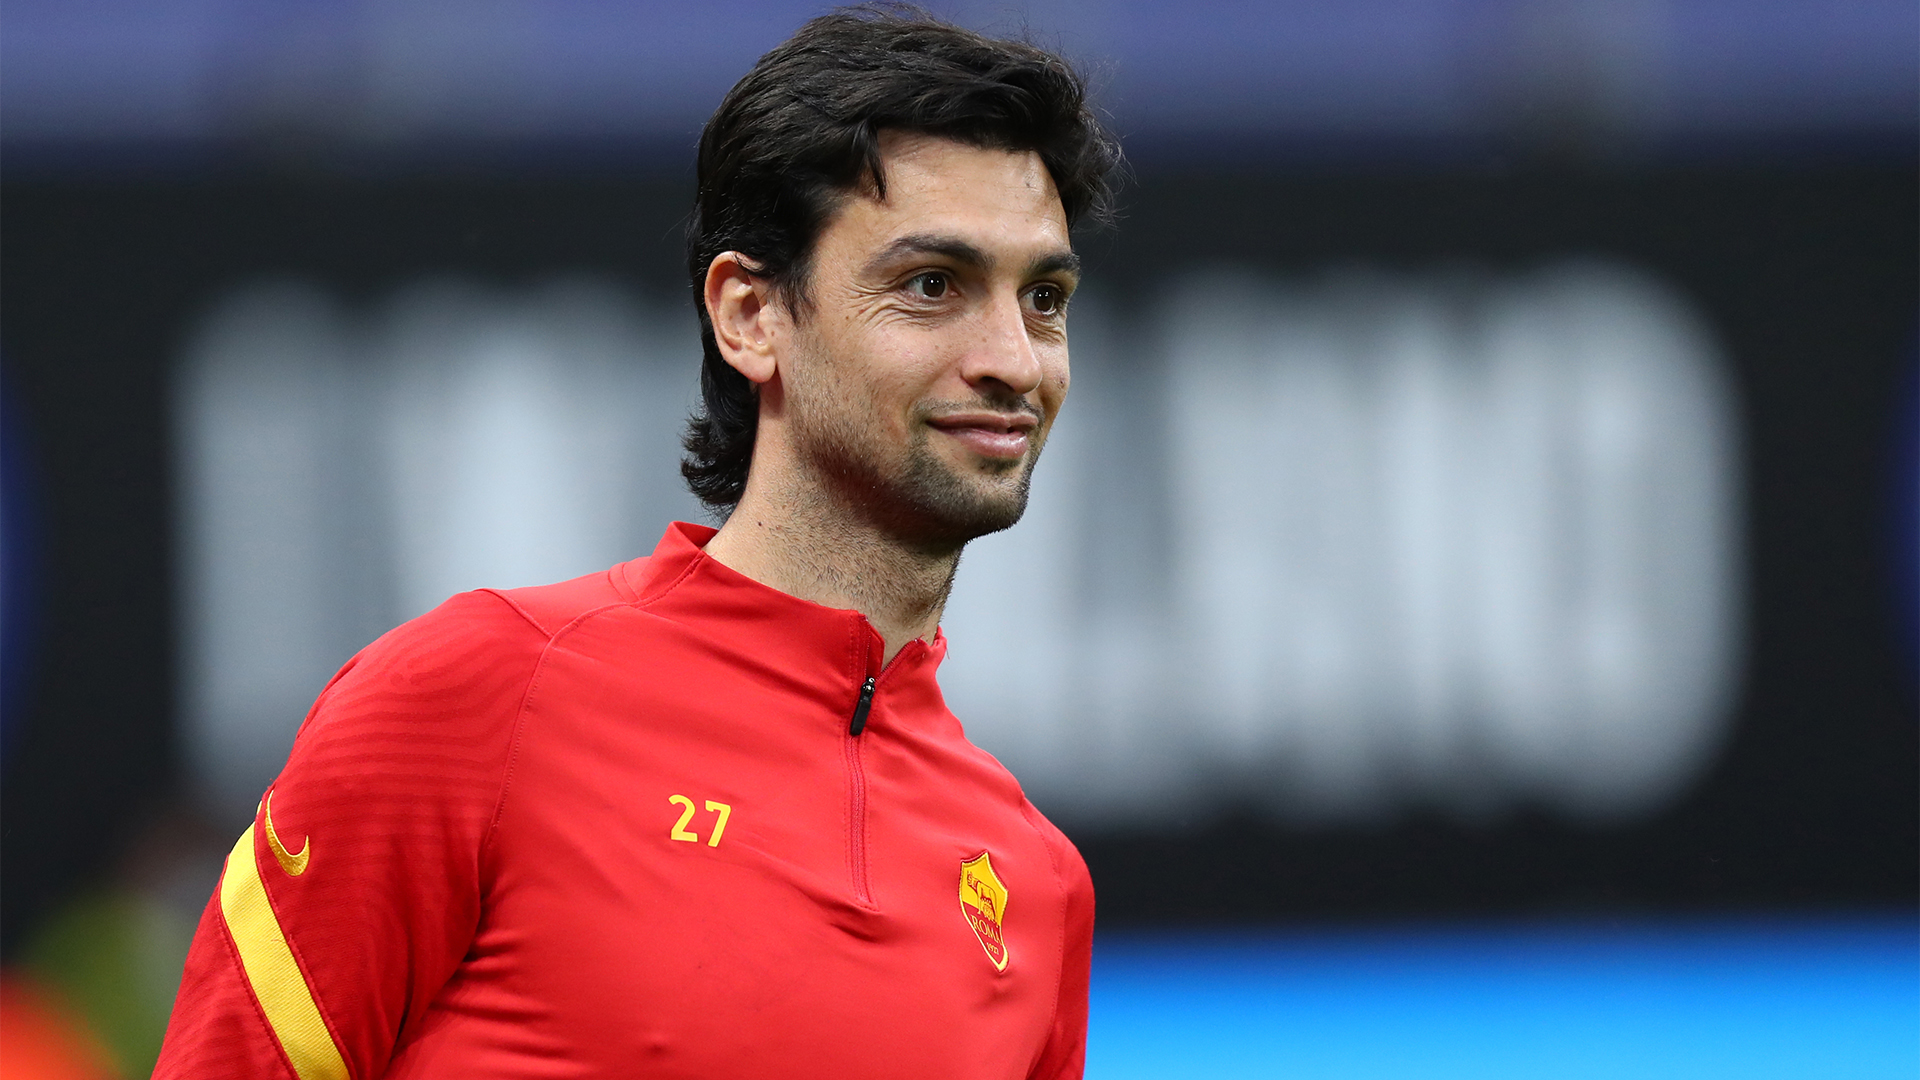 Ex-Roma forward Pastore has revealed Milan as the Italian club he would have preferred playing for, despite his three-season stint with the Giallorossi.